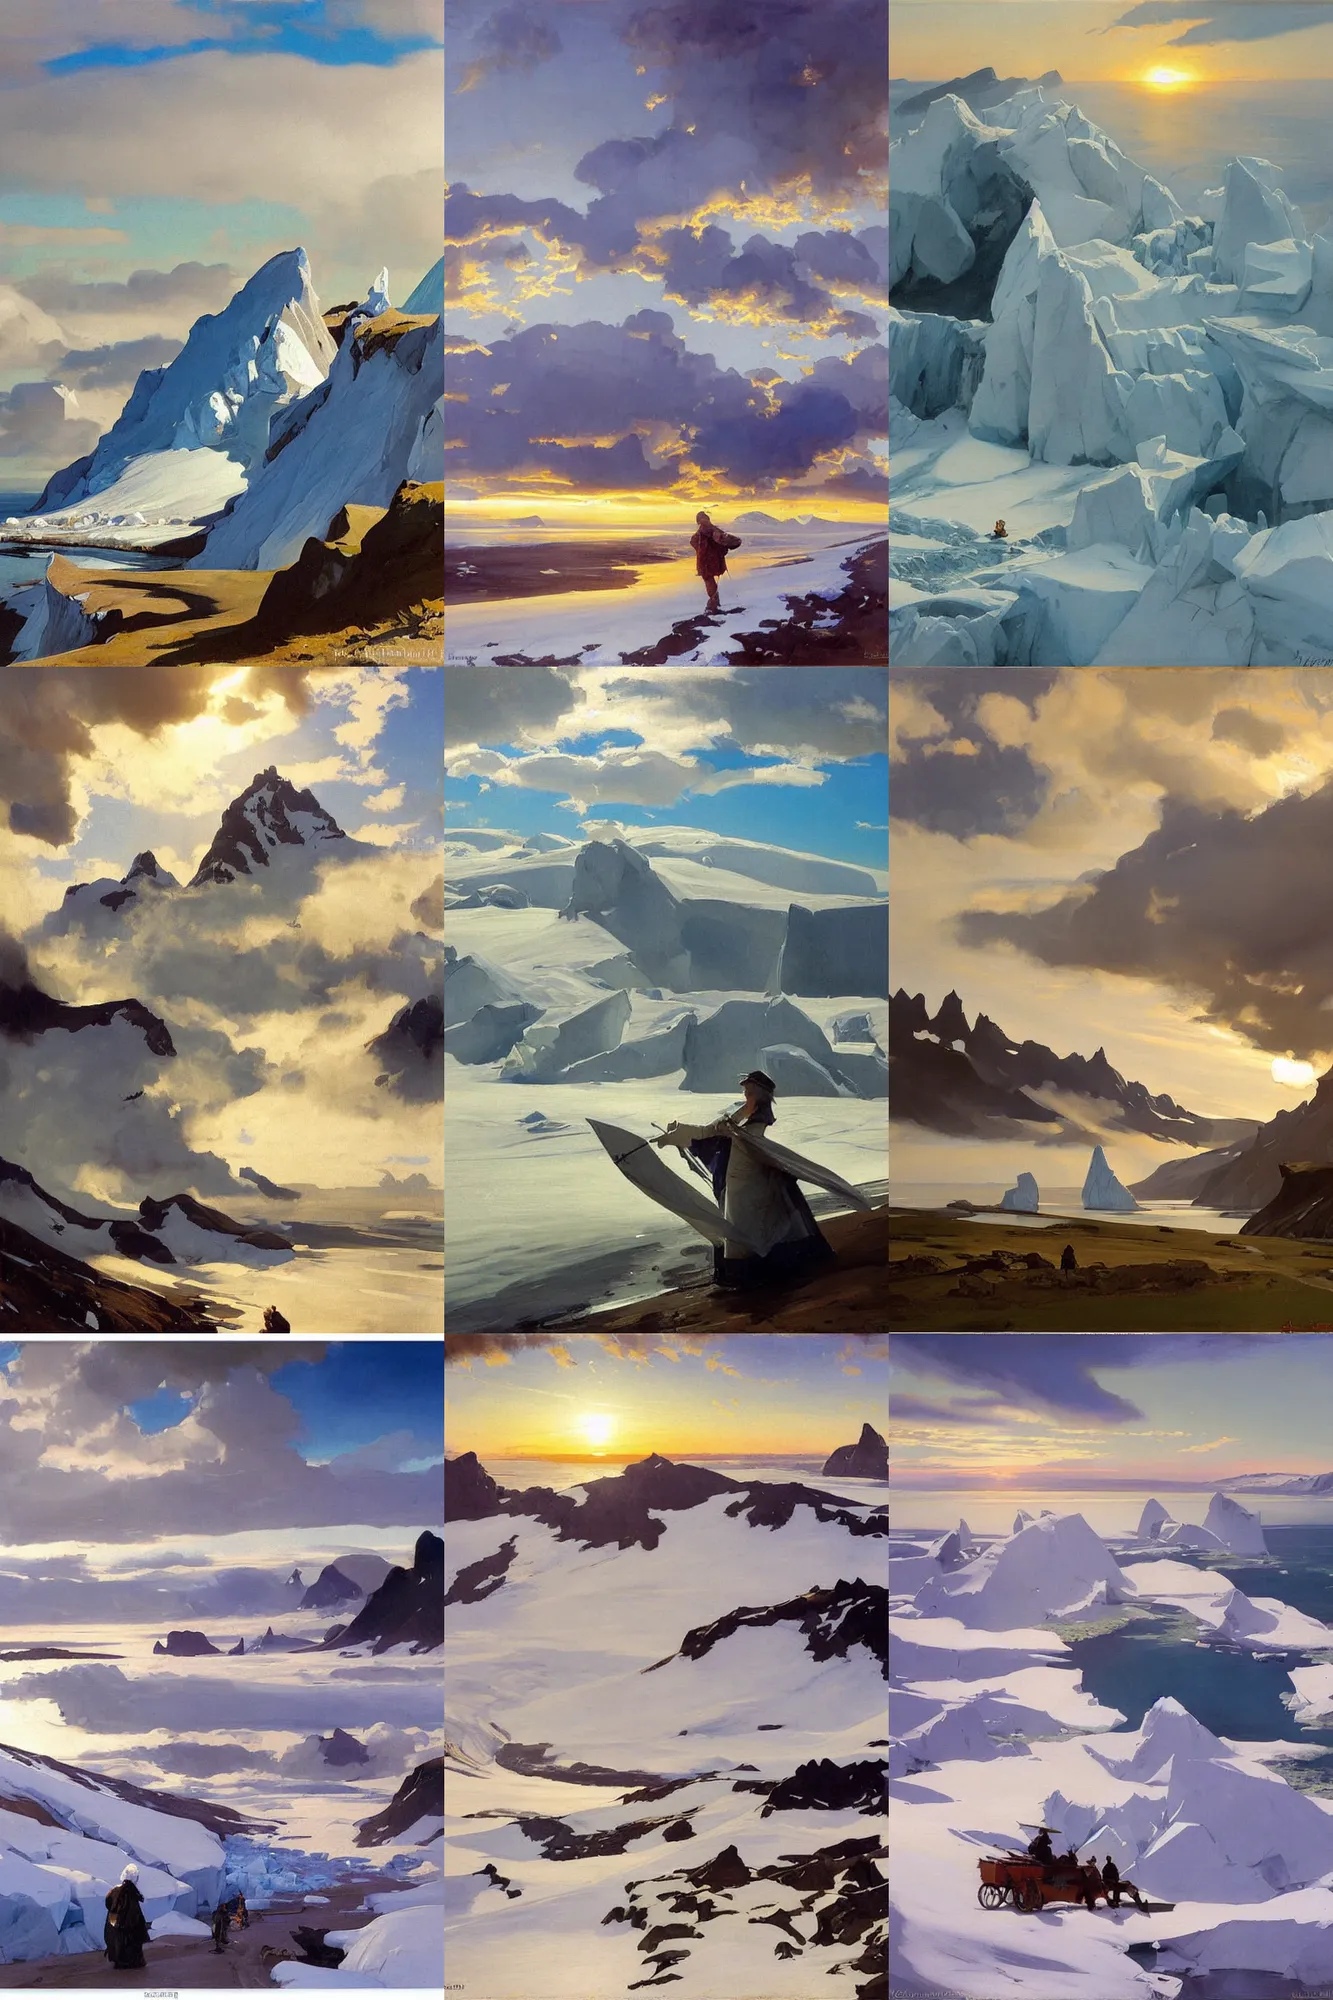 Prompt: painting by sargent leyendecker and gurney, rhads, vasnetsov, savrasov levitan polenov, middle ages, sunset sinrise, above the layered low clouds travel path road to sea bay view photo of greenland and iceland glacier and icebergs overcast